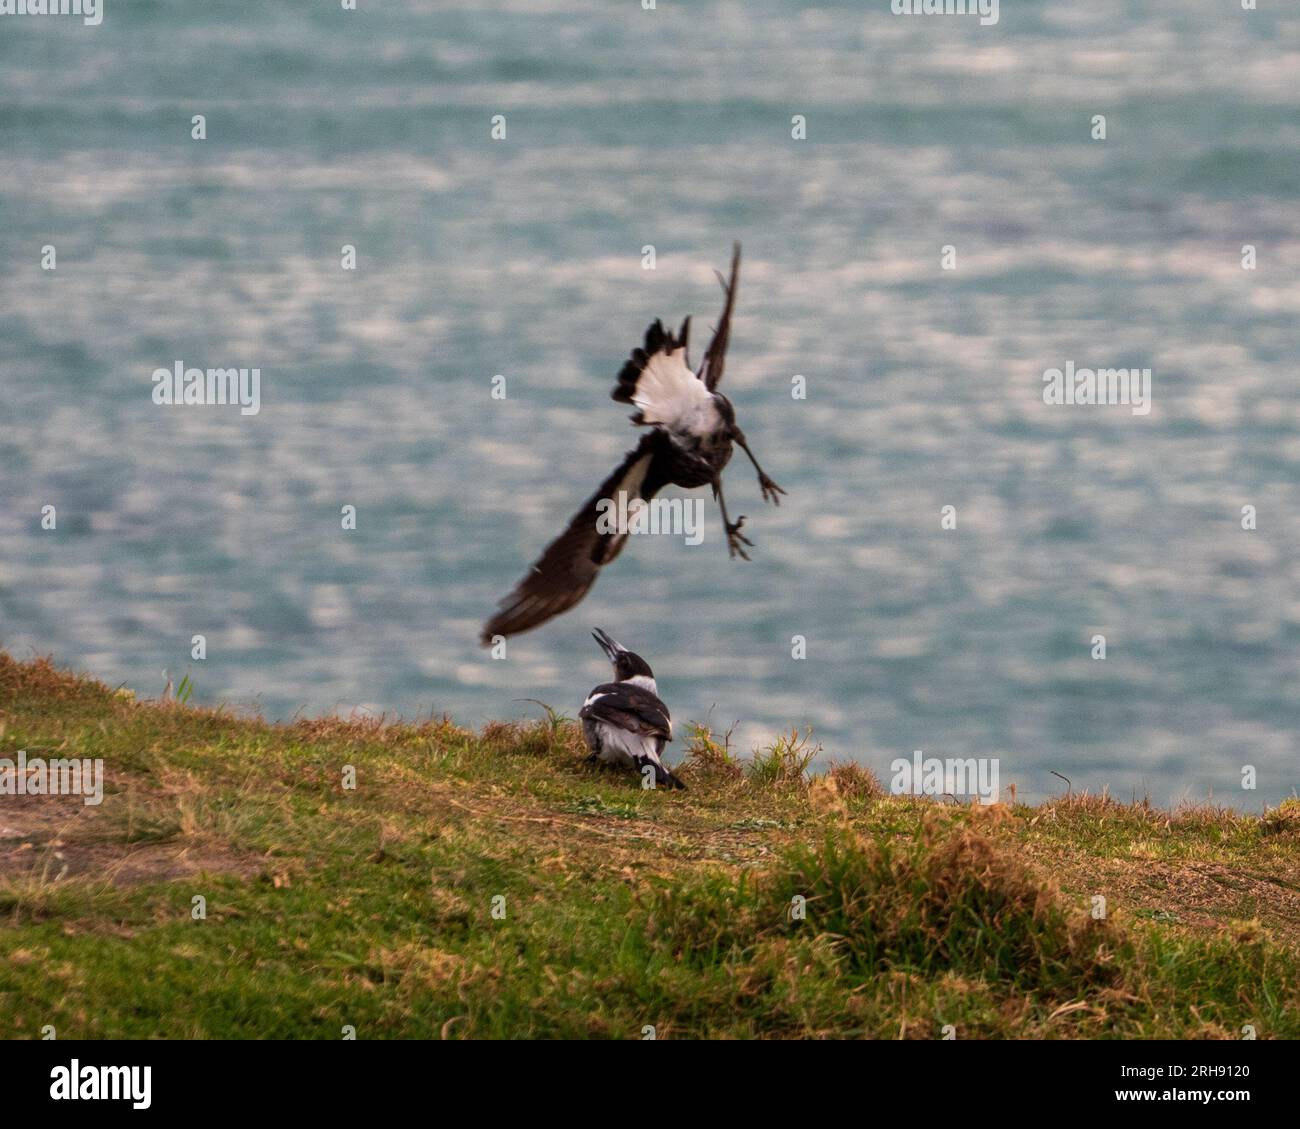 Young Australian Magpie swooping in towards another one under attack that is cowering slightly on the ground, juveniles play fighting Stock Photo